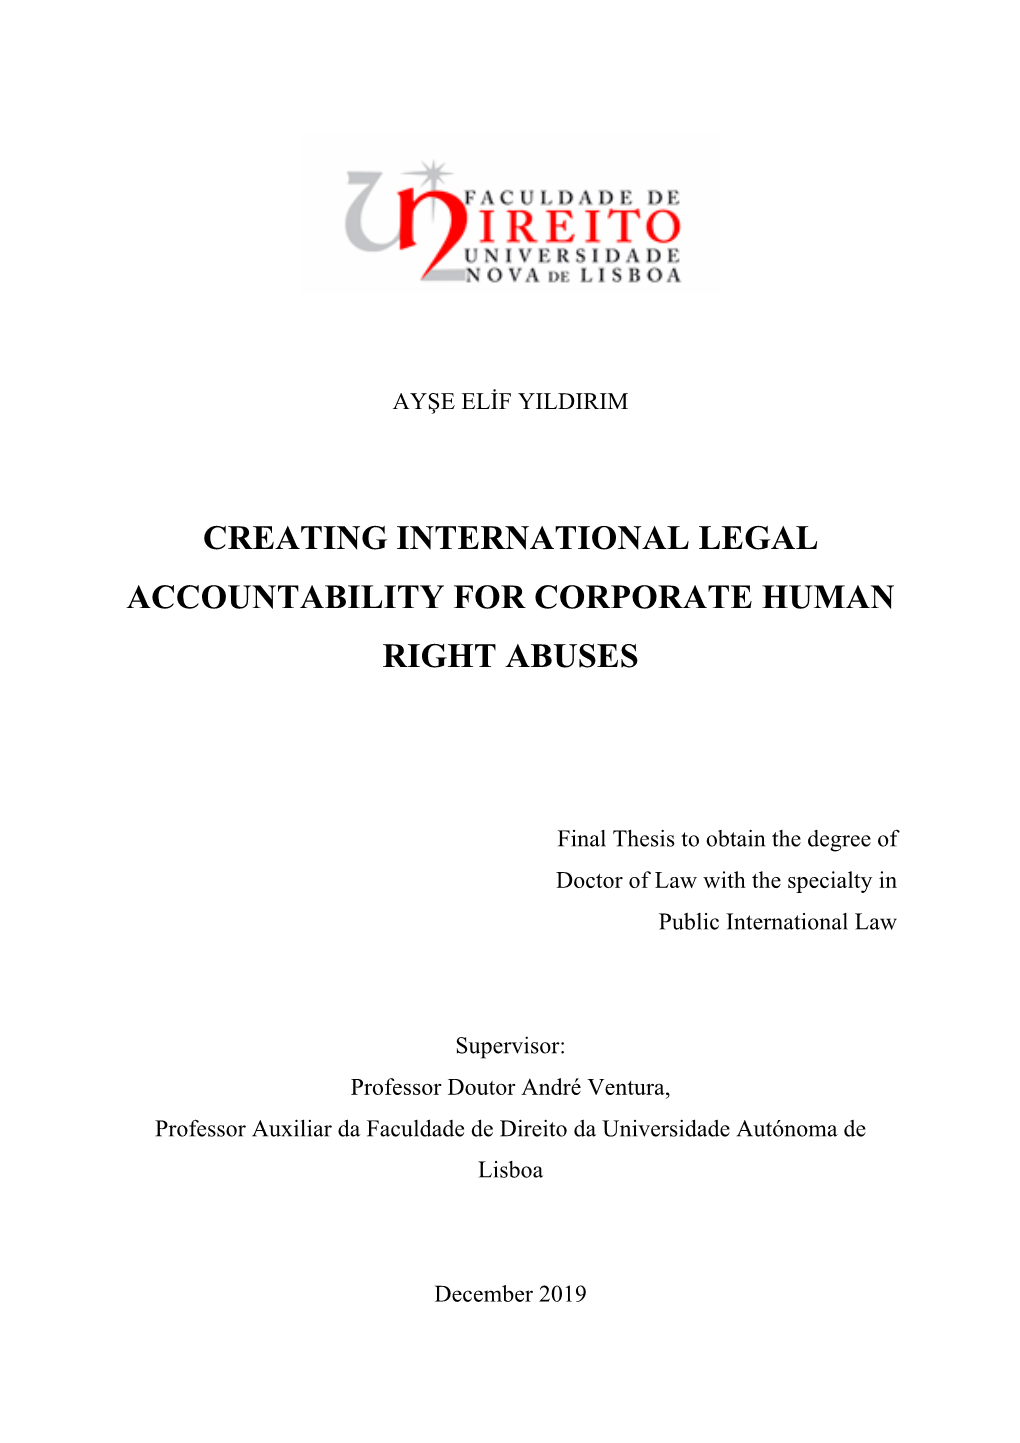 Creating International Legal Accountability for Corporate Human Right Abuses